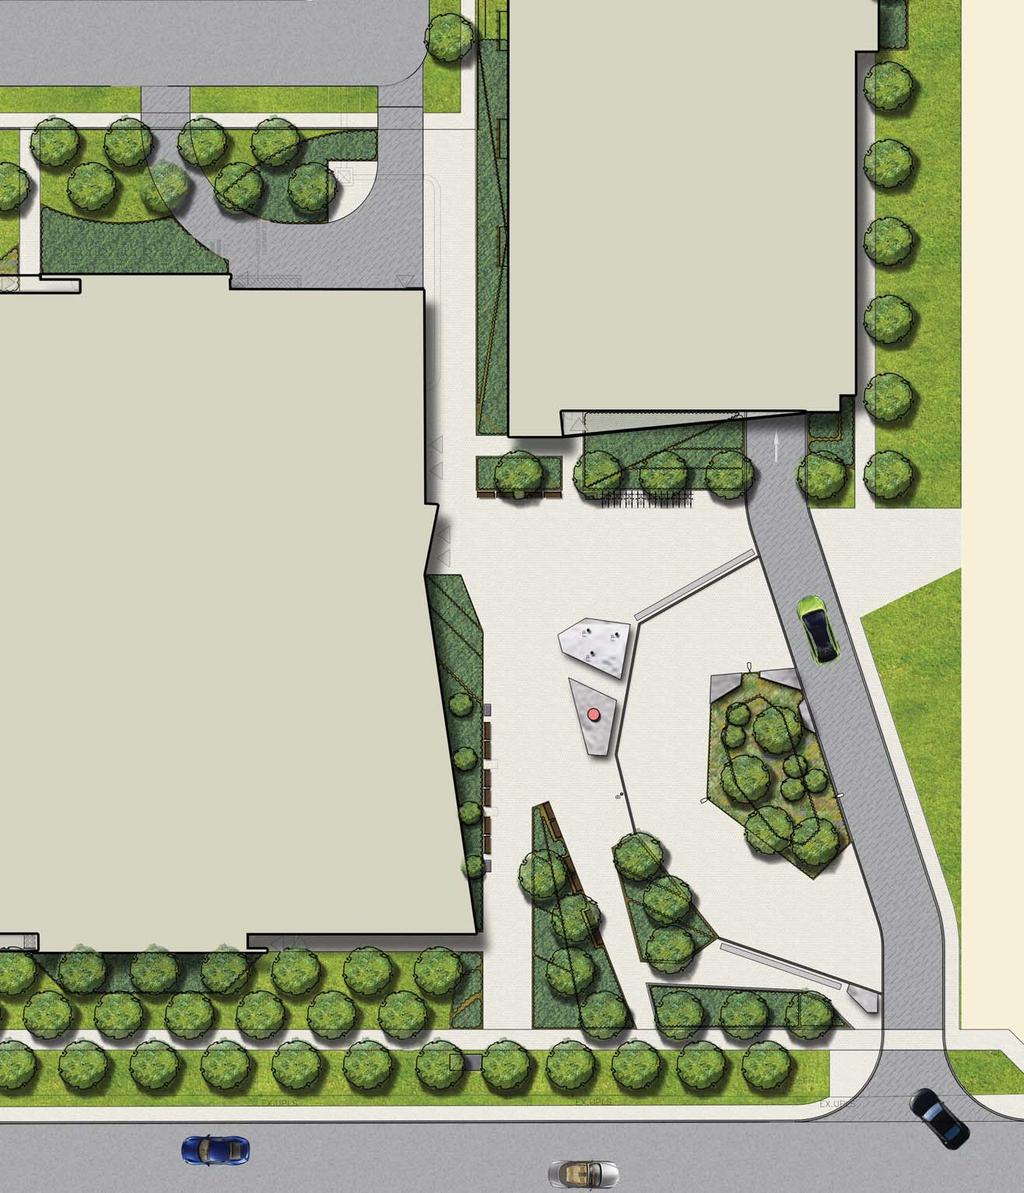 Entry Court & Plaza Design (South Side of Building) Tree Bosque Rows of trees arranged to frame